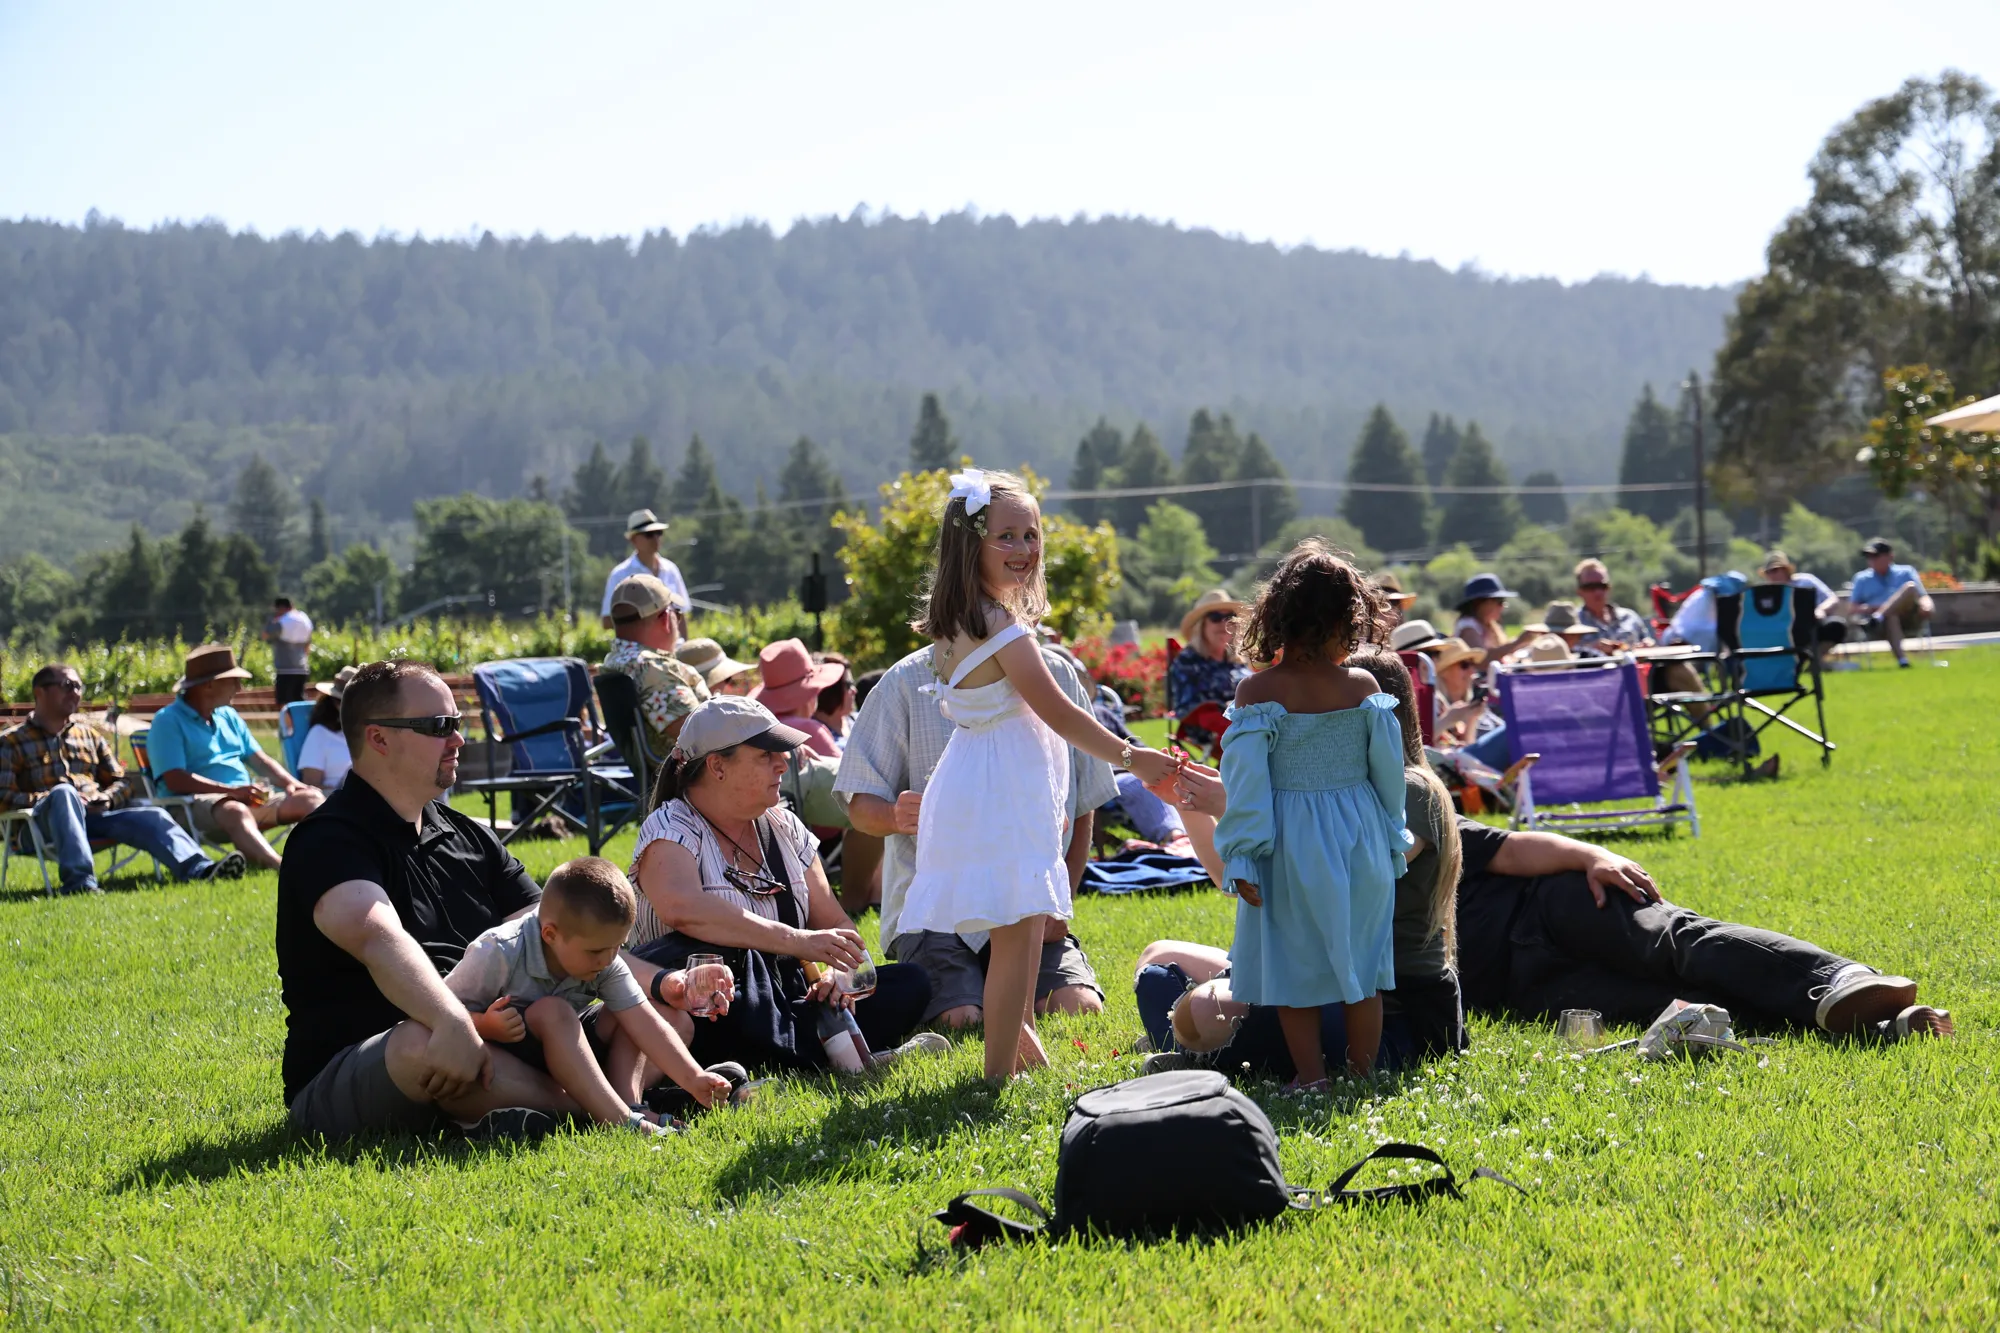 Children playing at Sugarloaf Wine Co winery's Sunday Social Club live music event